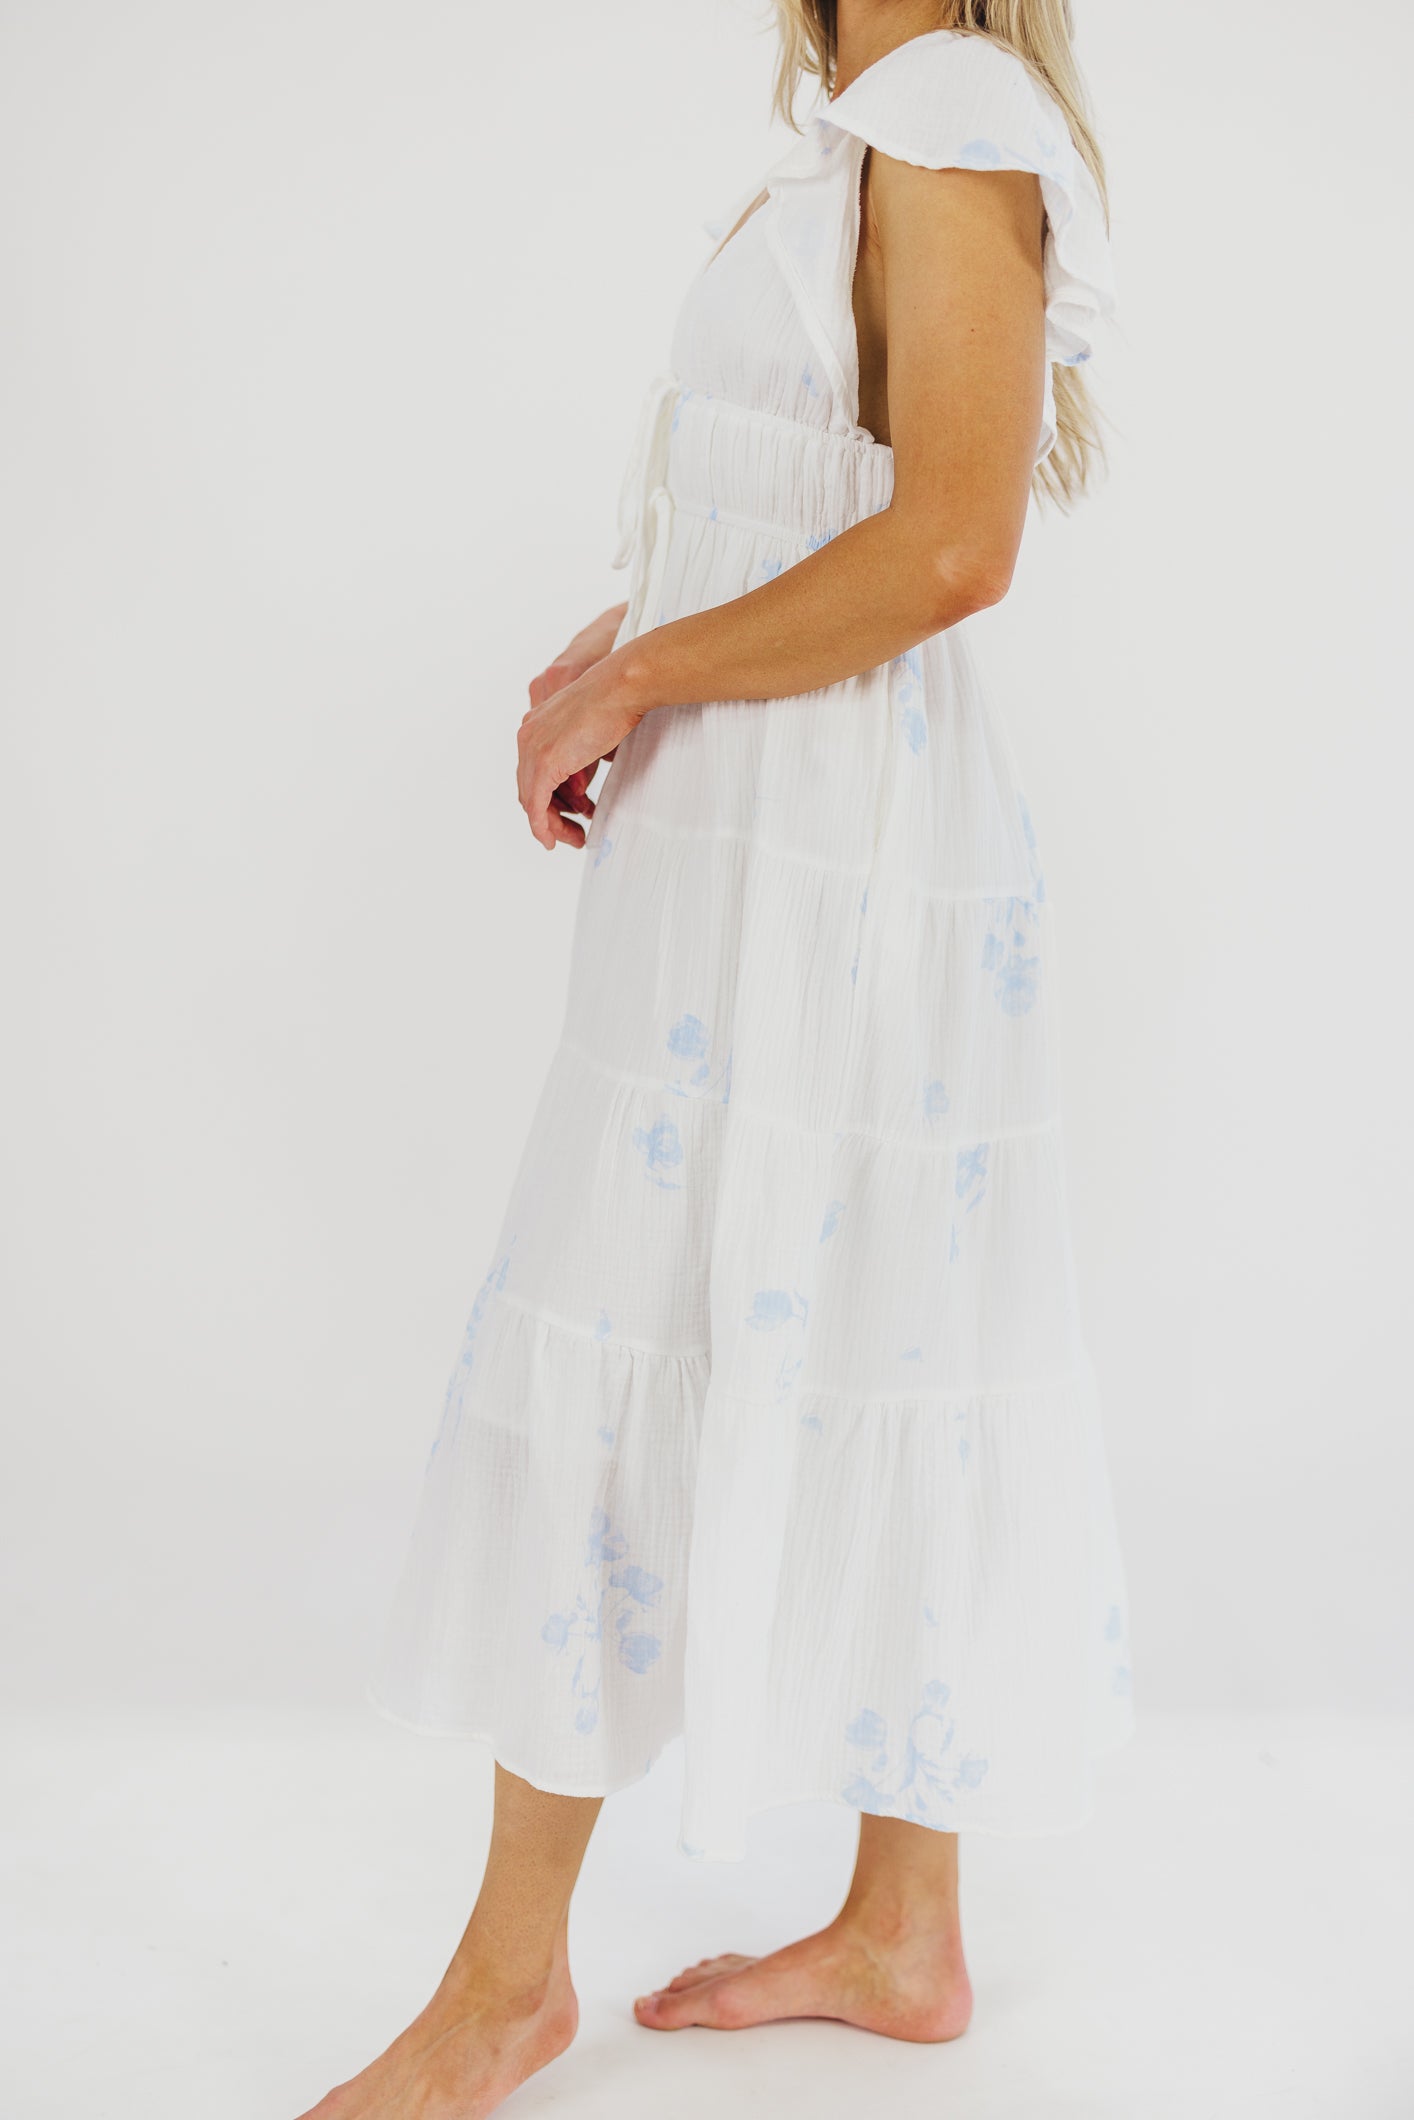 Blaire Ruffled Sleeve Midi Dress in Off-White Floral